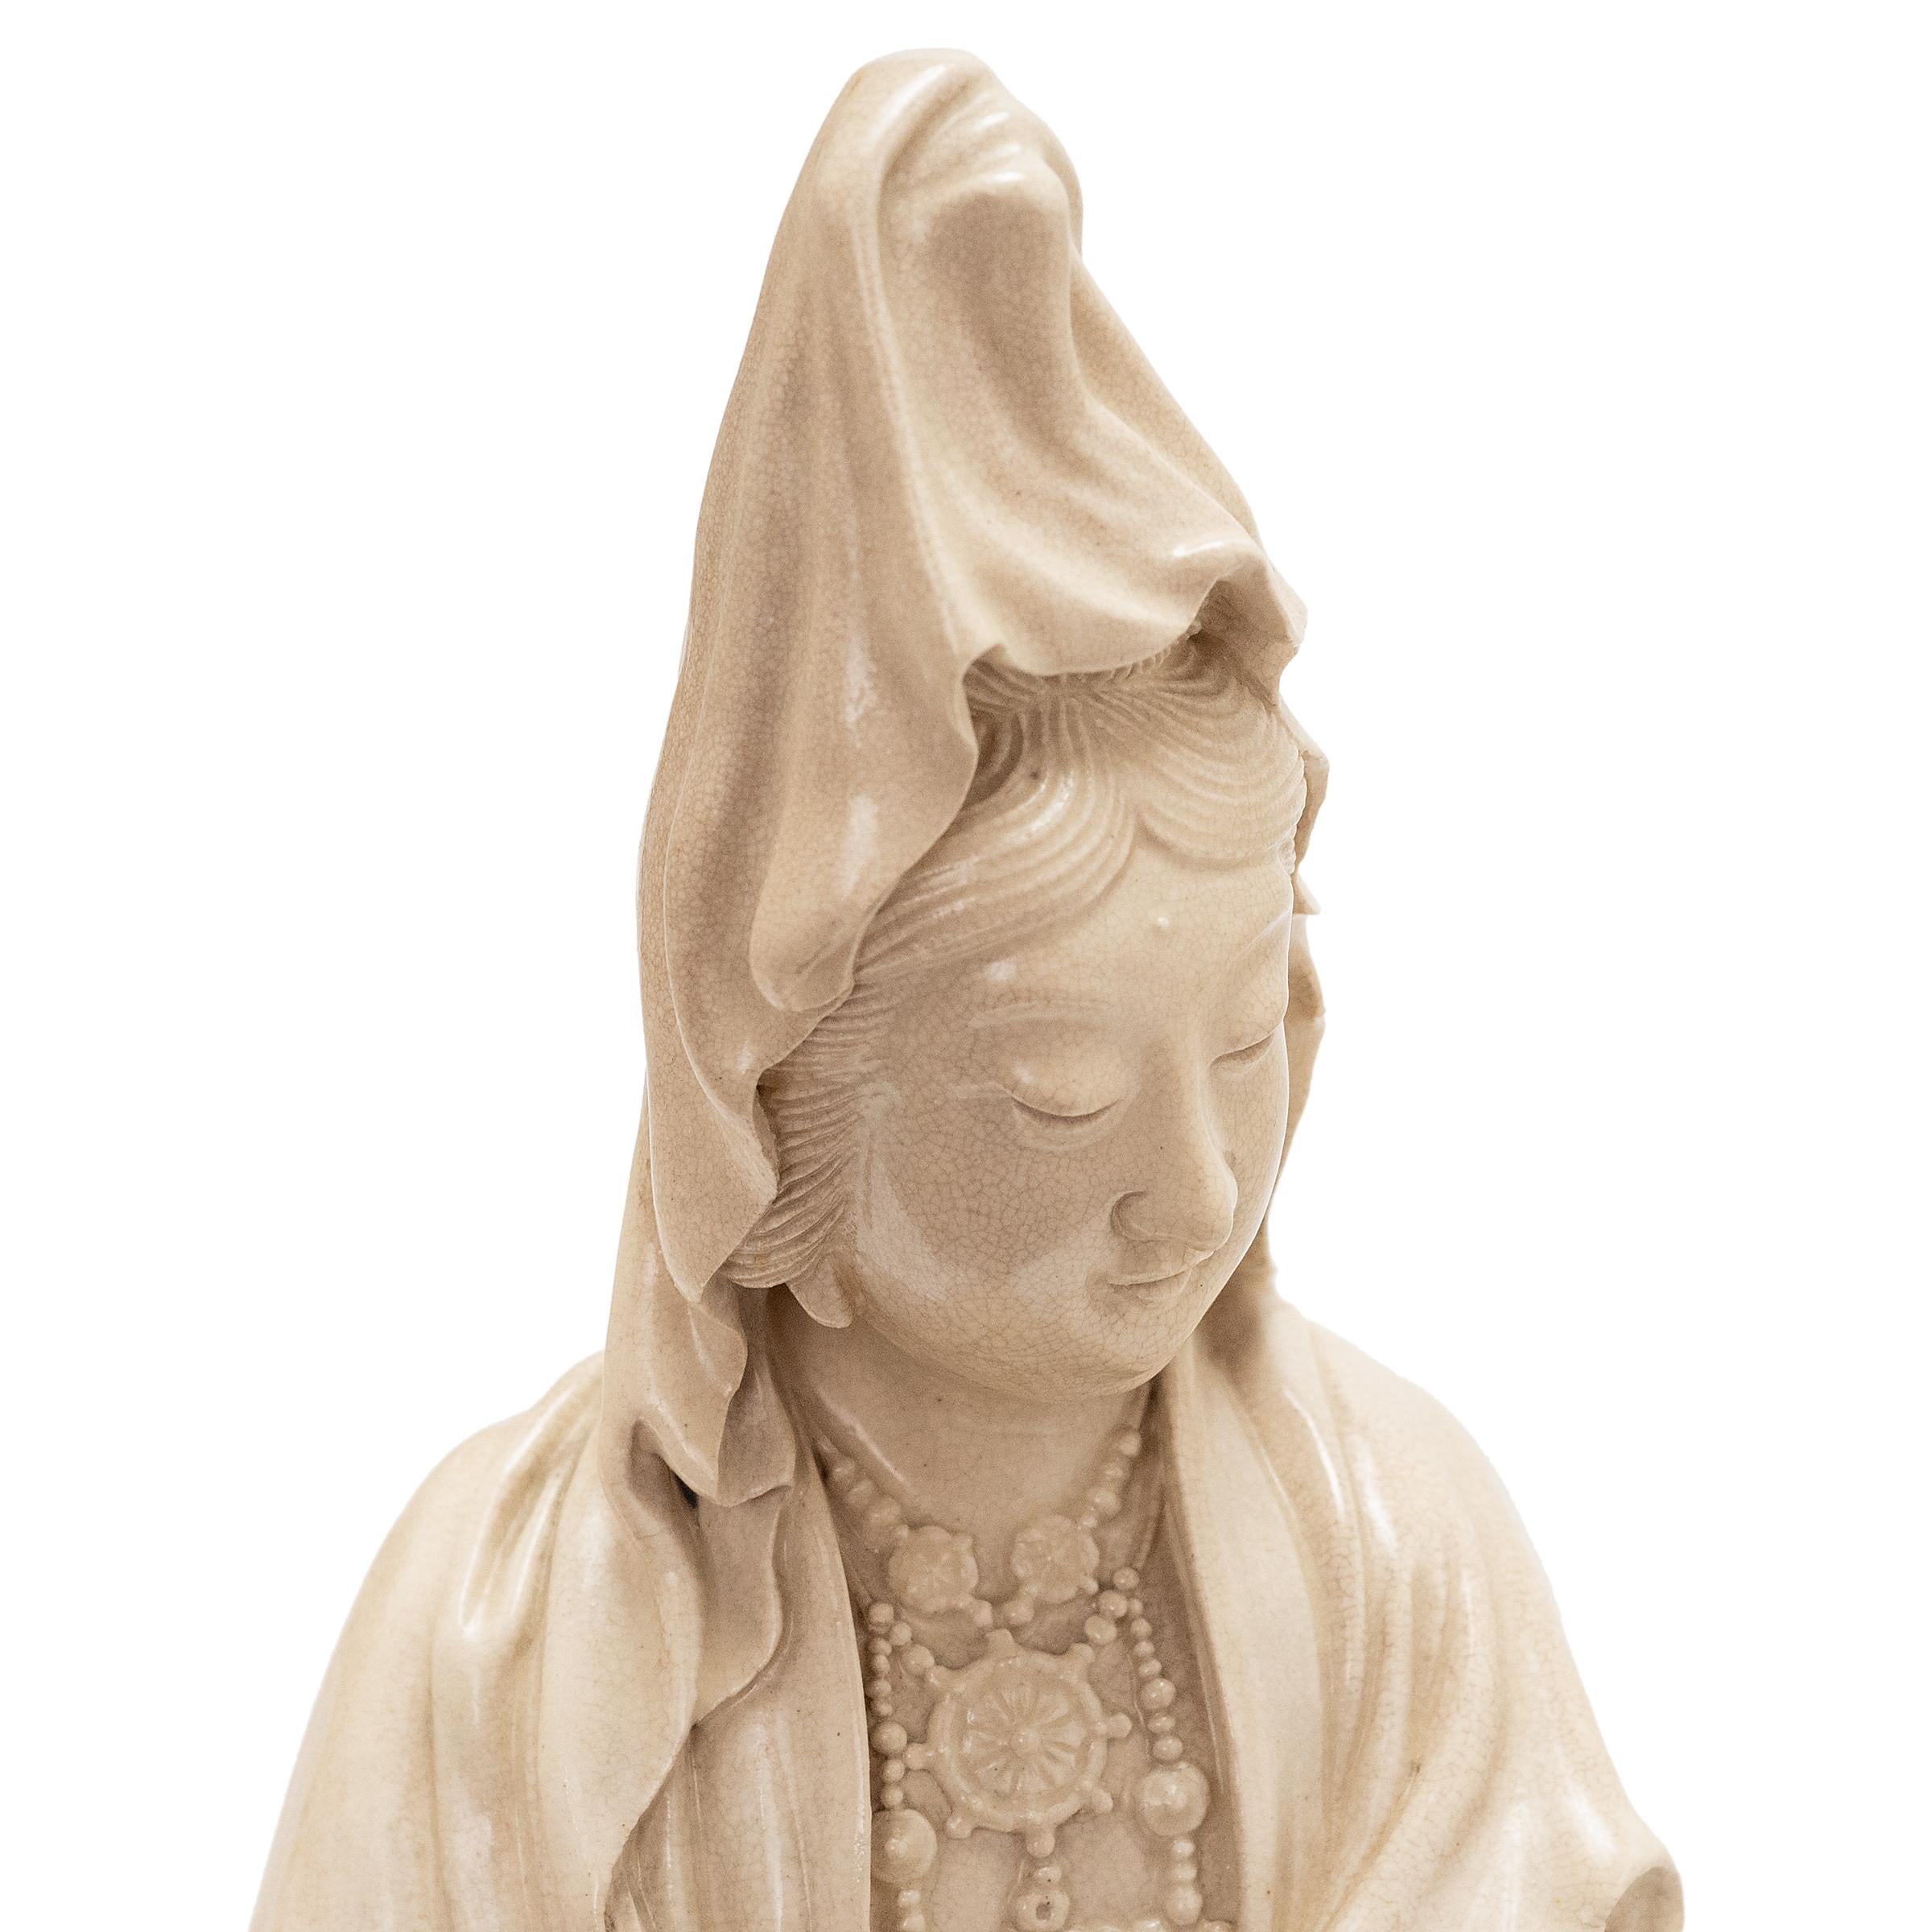 Glazed Blanc de Chine Seated Guanyin Sculpture, c. 1900 For Sale